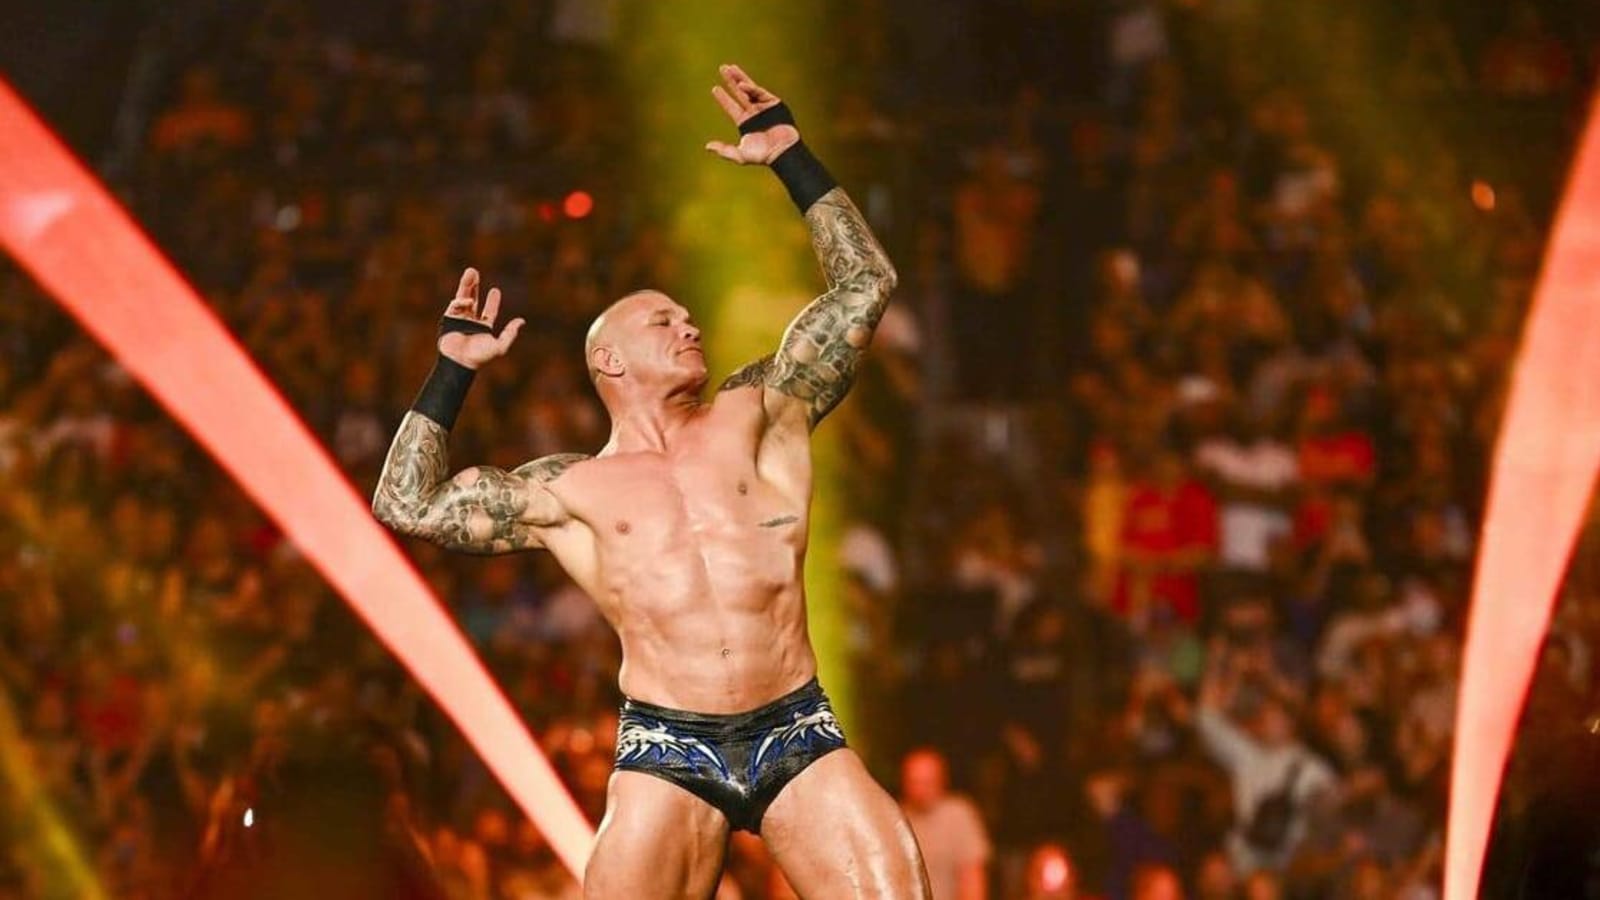 WWE Legend Randy Orton Speaks Out On The ‘Stressful’ Work Environment And Poor Product Vince McMahon Oversaw